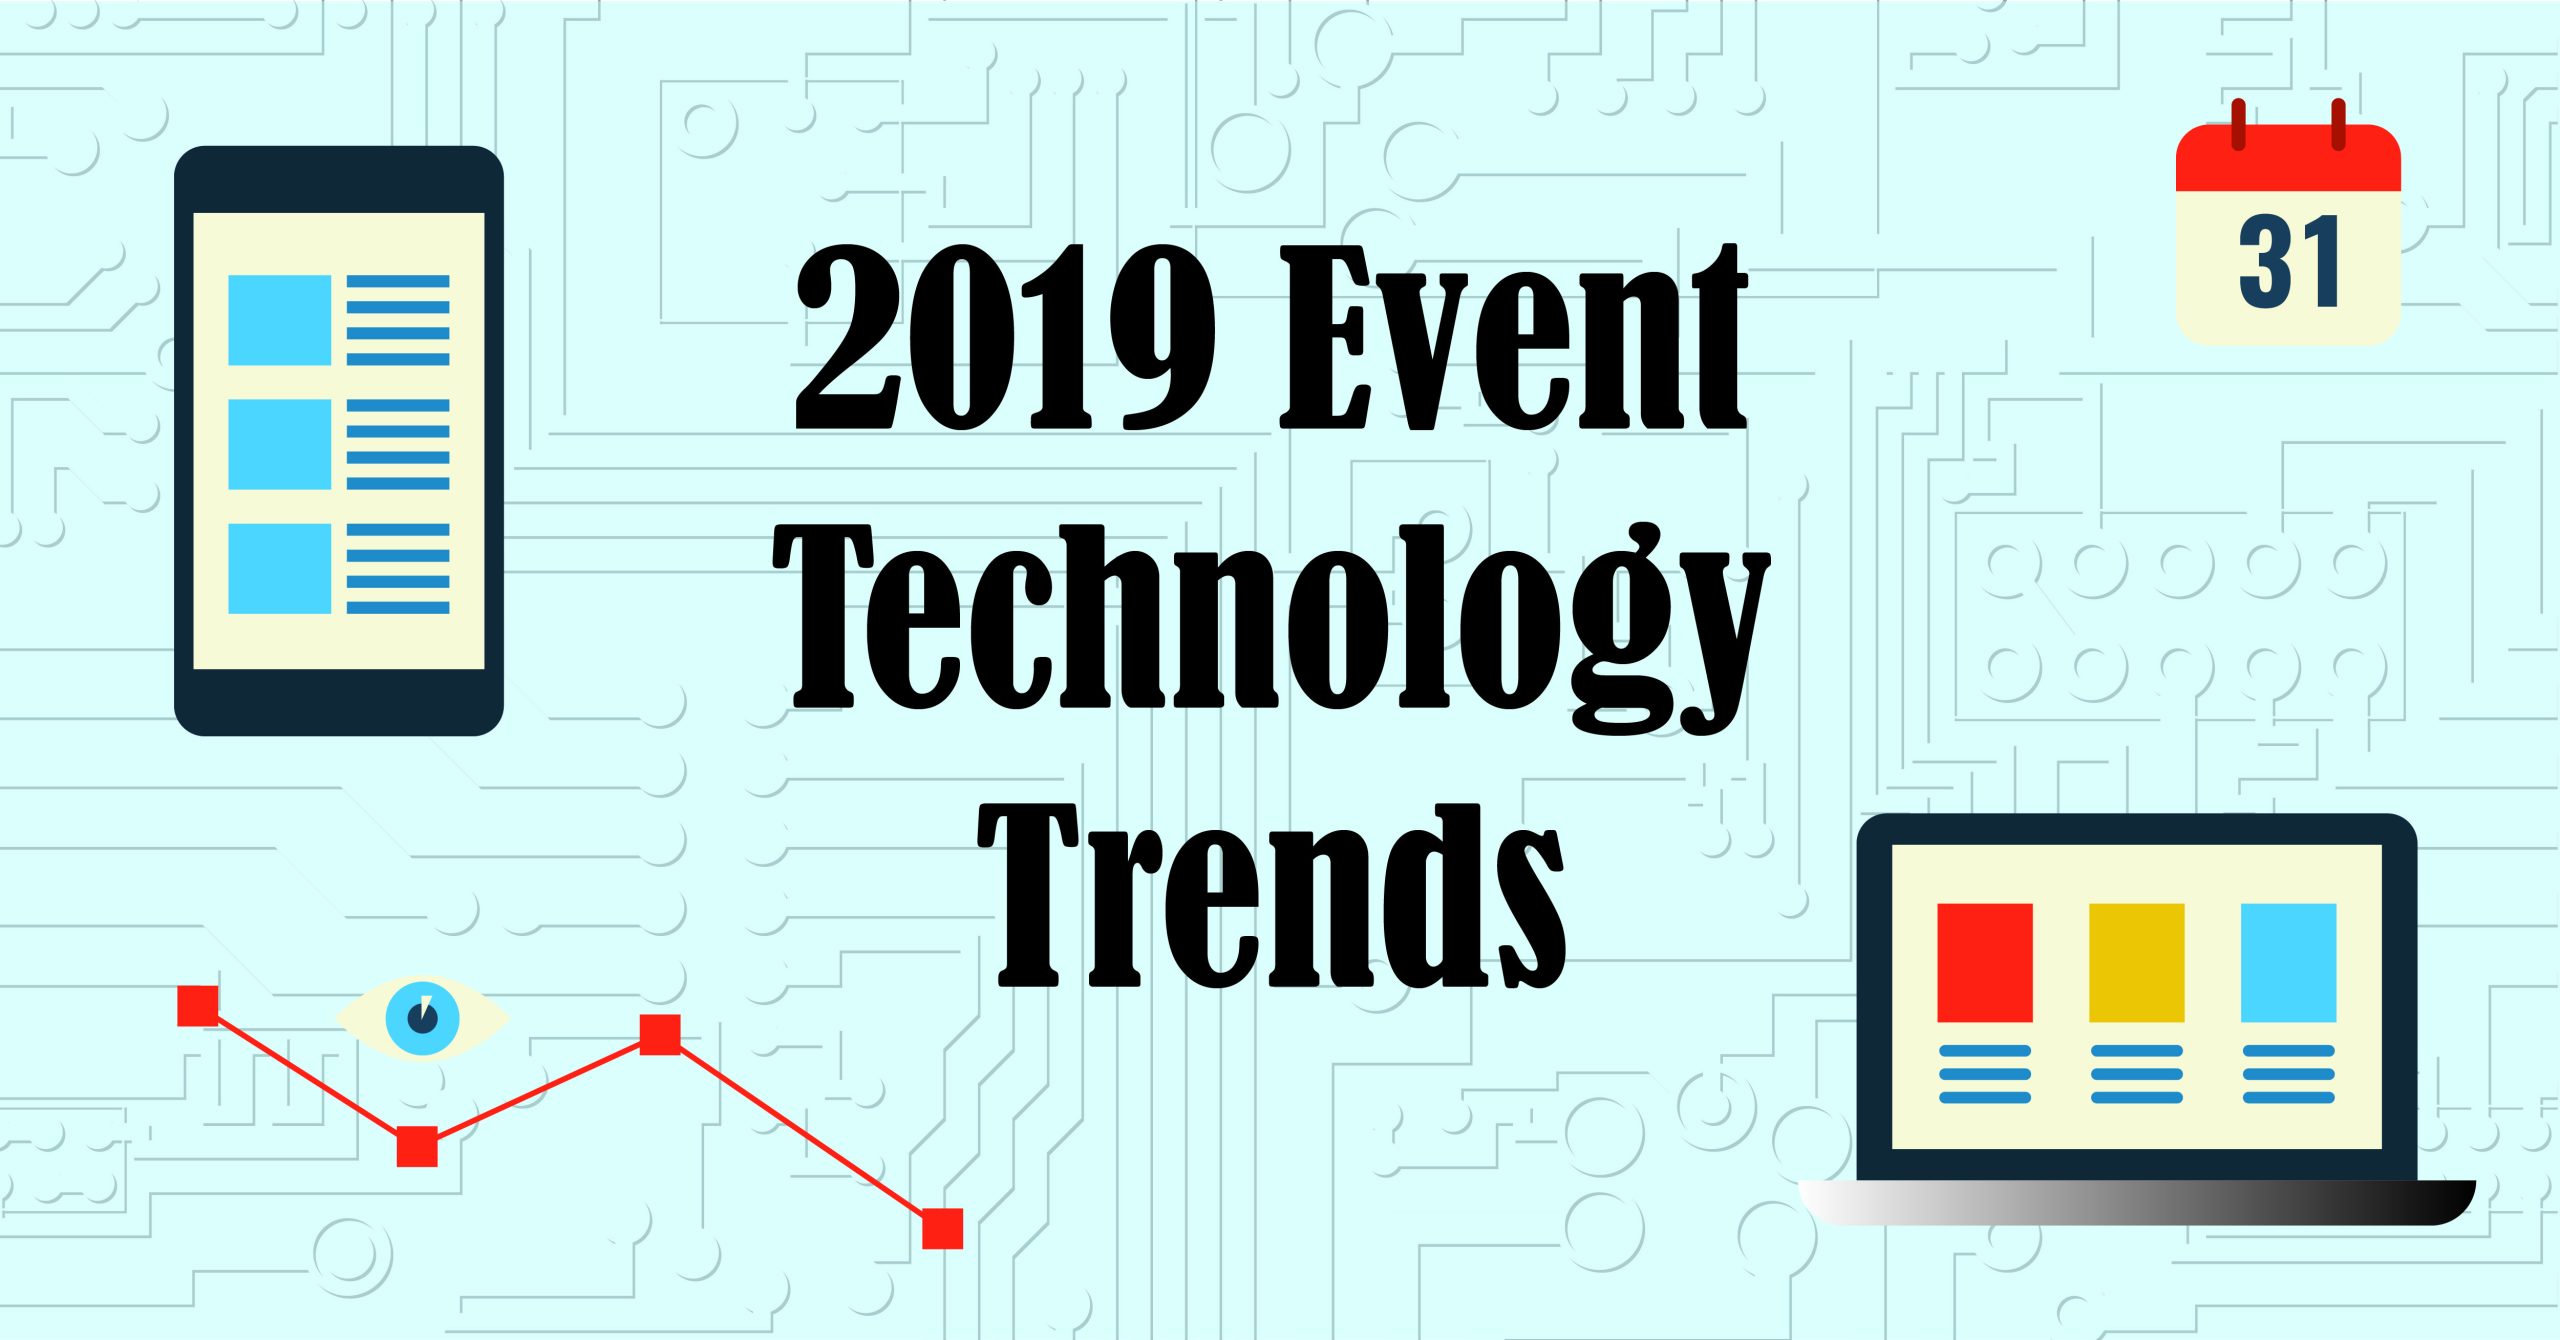 2019 Event Technology Trends